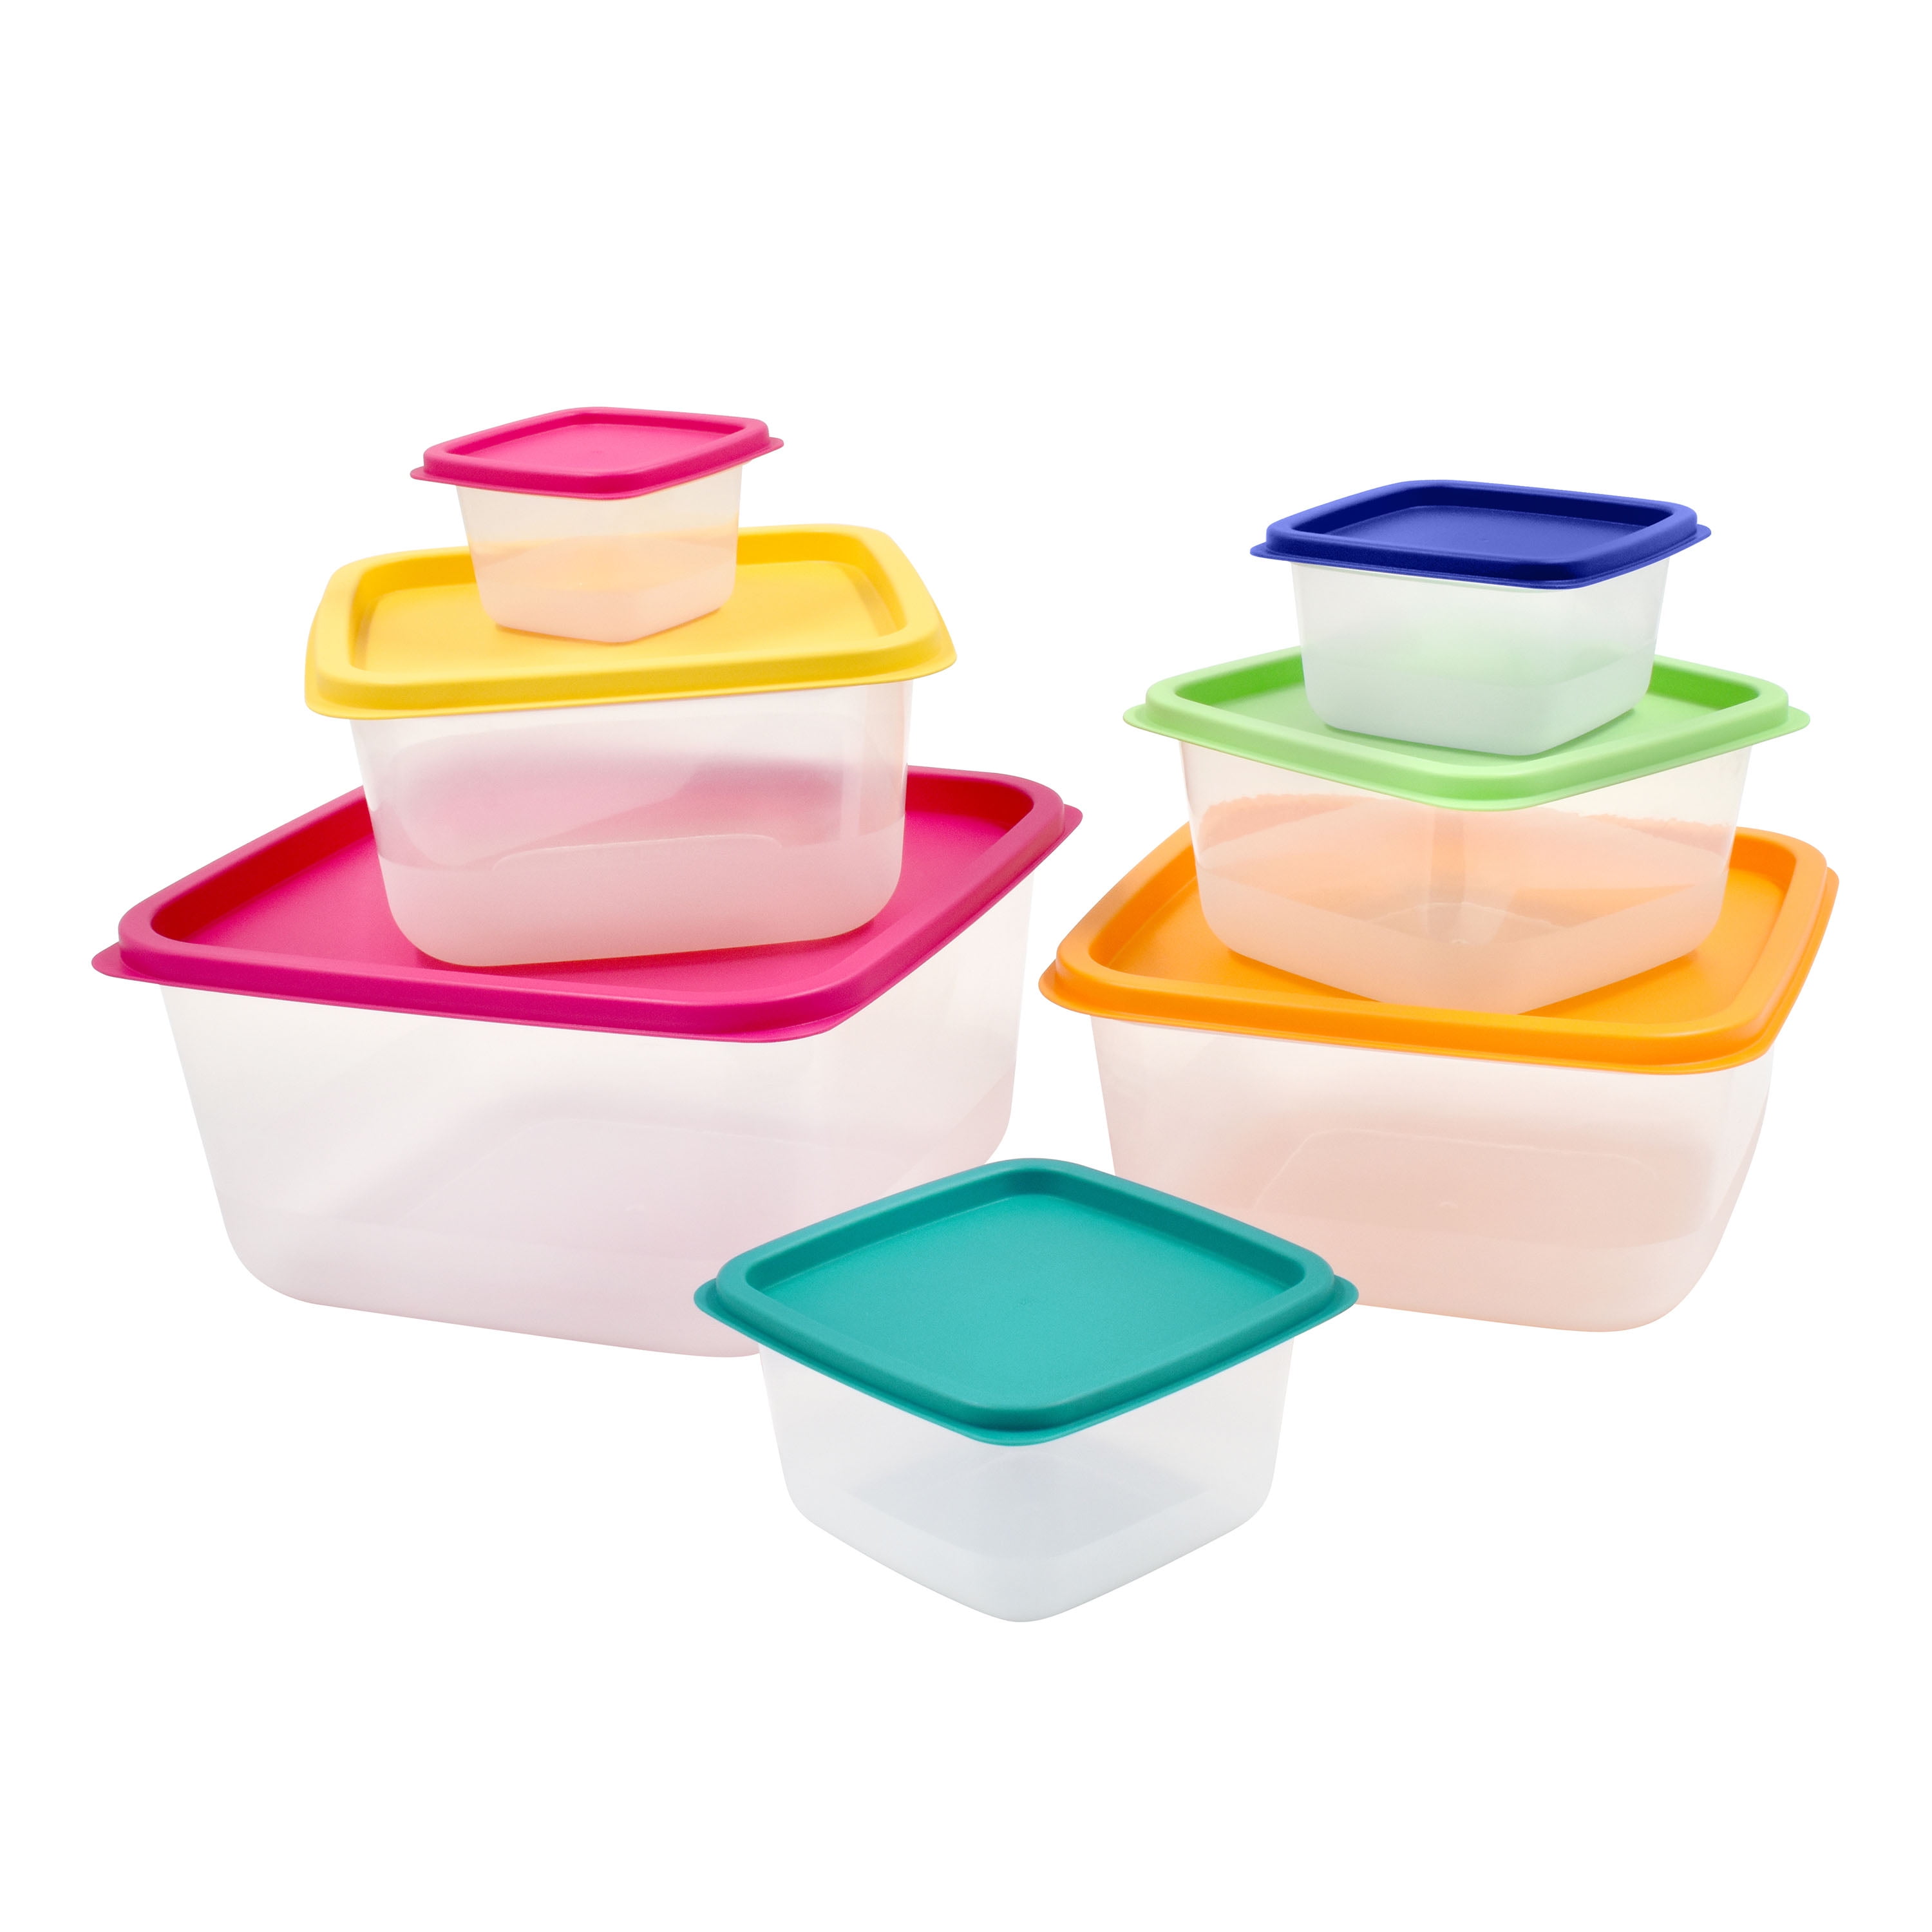 ColorLife 60-Piece Food Storage Containers With Lids, Salad